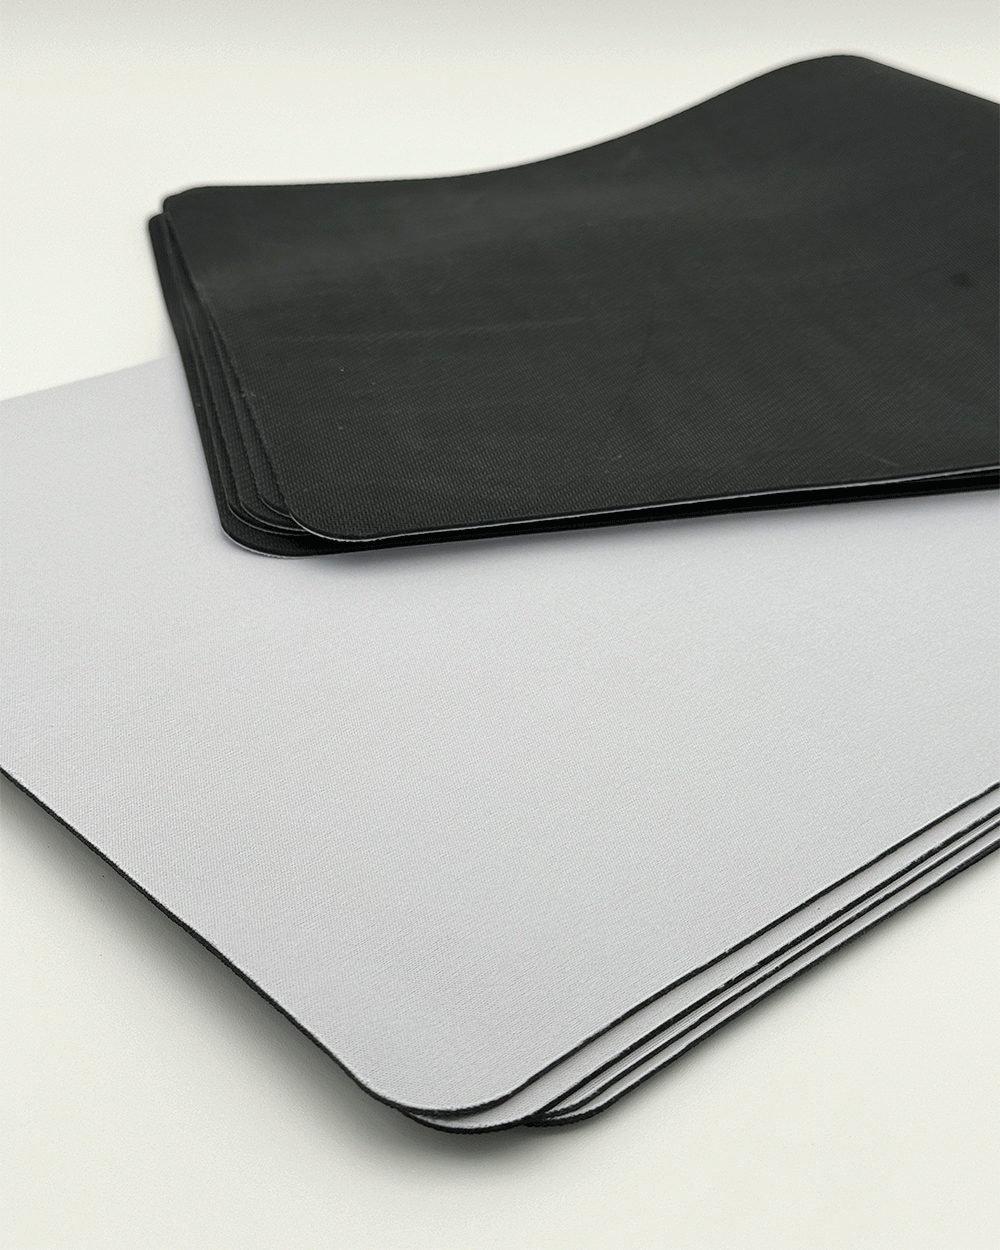 Ocean Mouse Pad with Nonslip Base (SIZE 12"X 31")